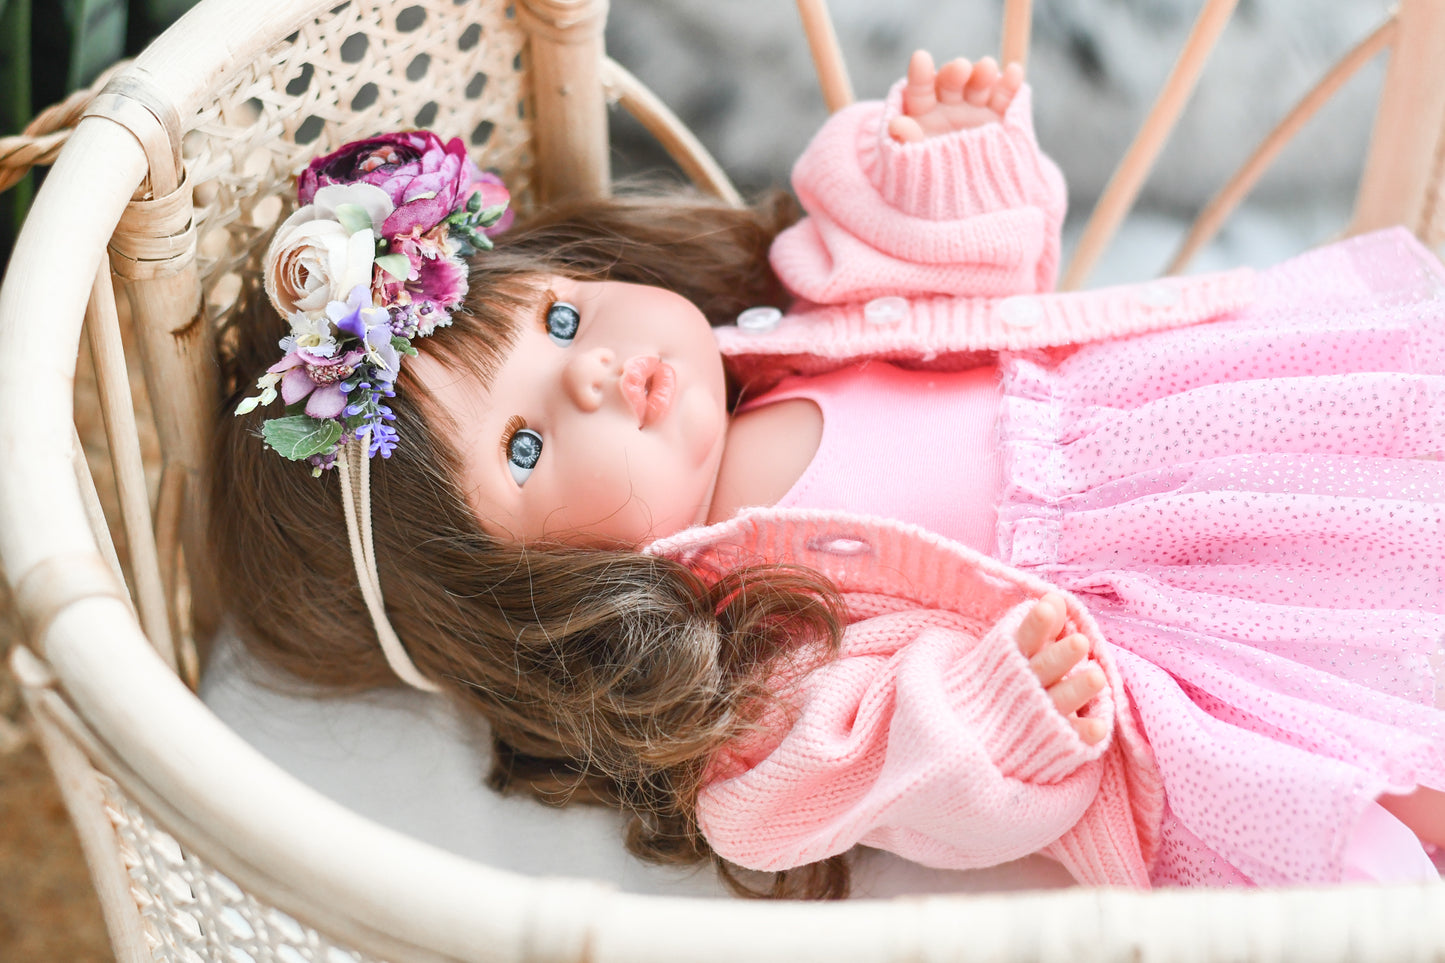 Aria With Pink Tutu Outfit- Mini Colettos Girl Doll - OOAK